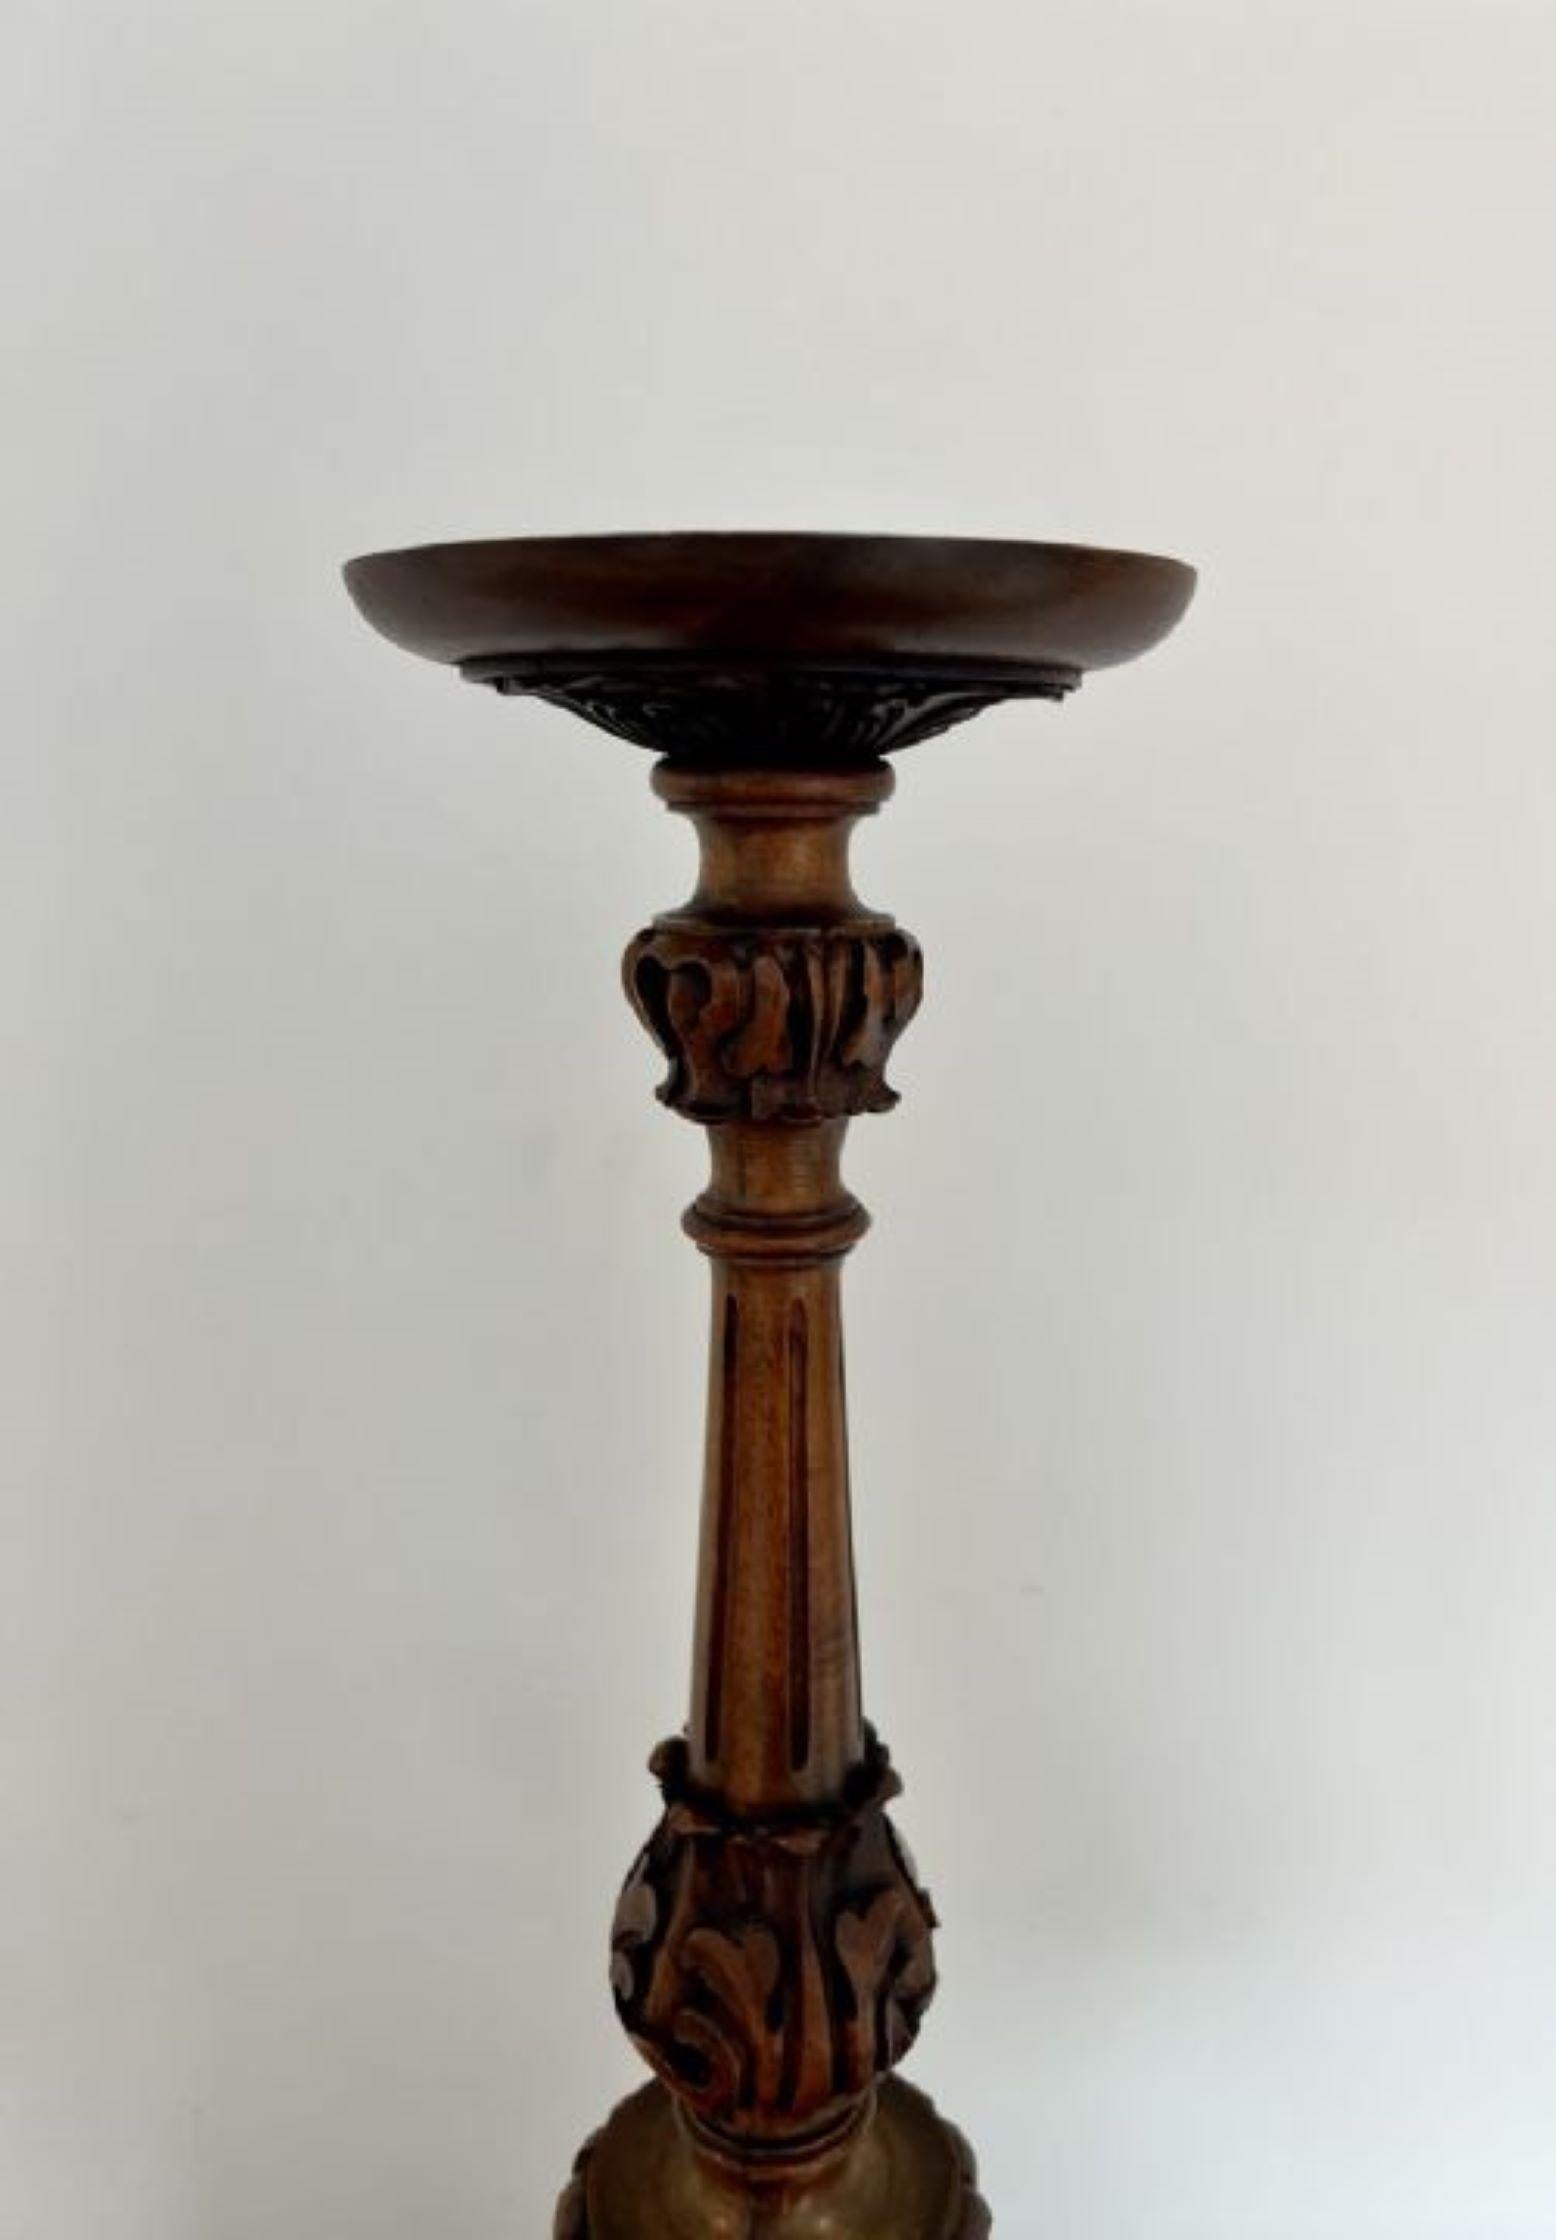 Unusual Italian antique Victorian quality carved walnut stand having a quality carved walnut Italian stand with a circular top supported by a turned reeded carved walnut column, standing on a carved walnut base with scroll and claw feet. 